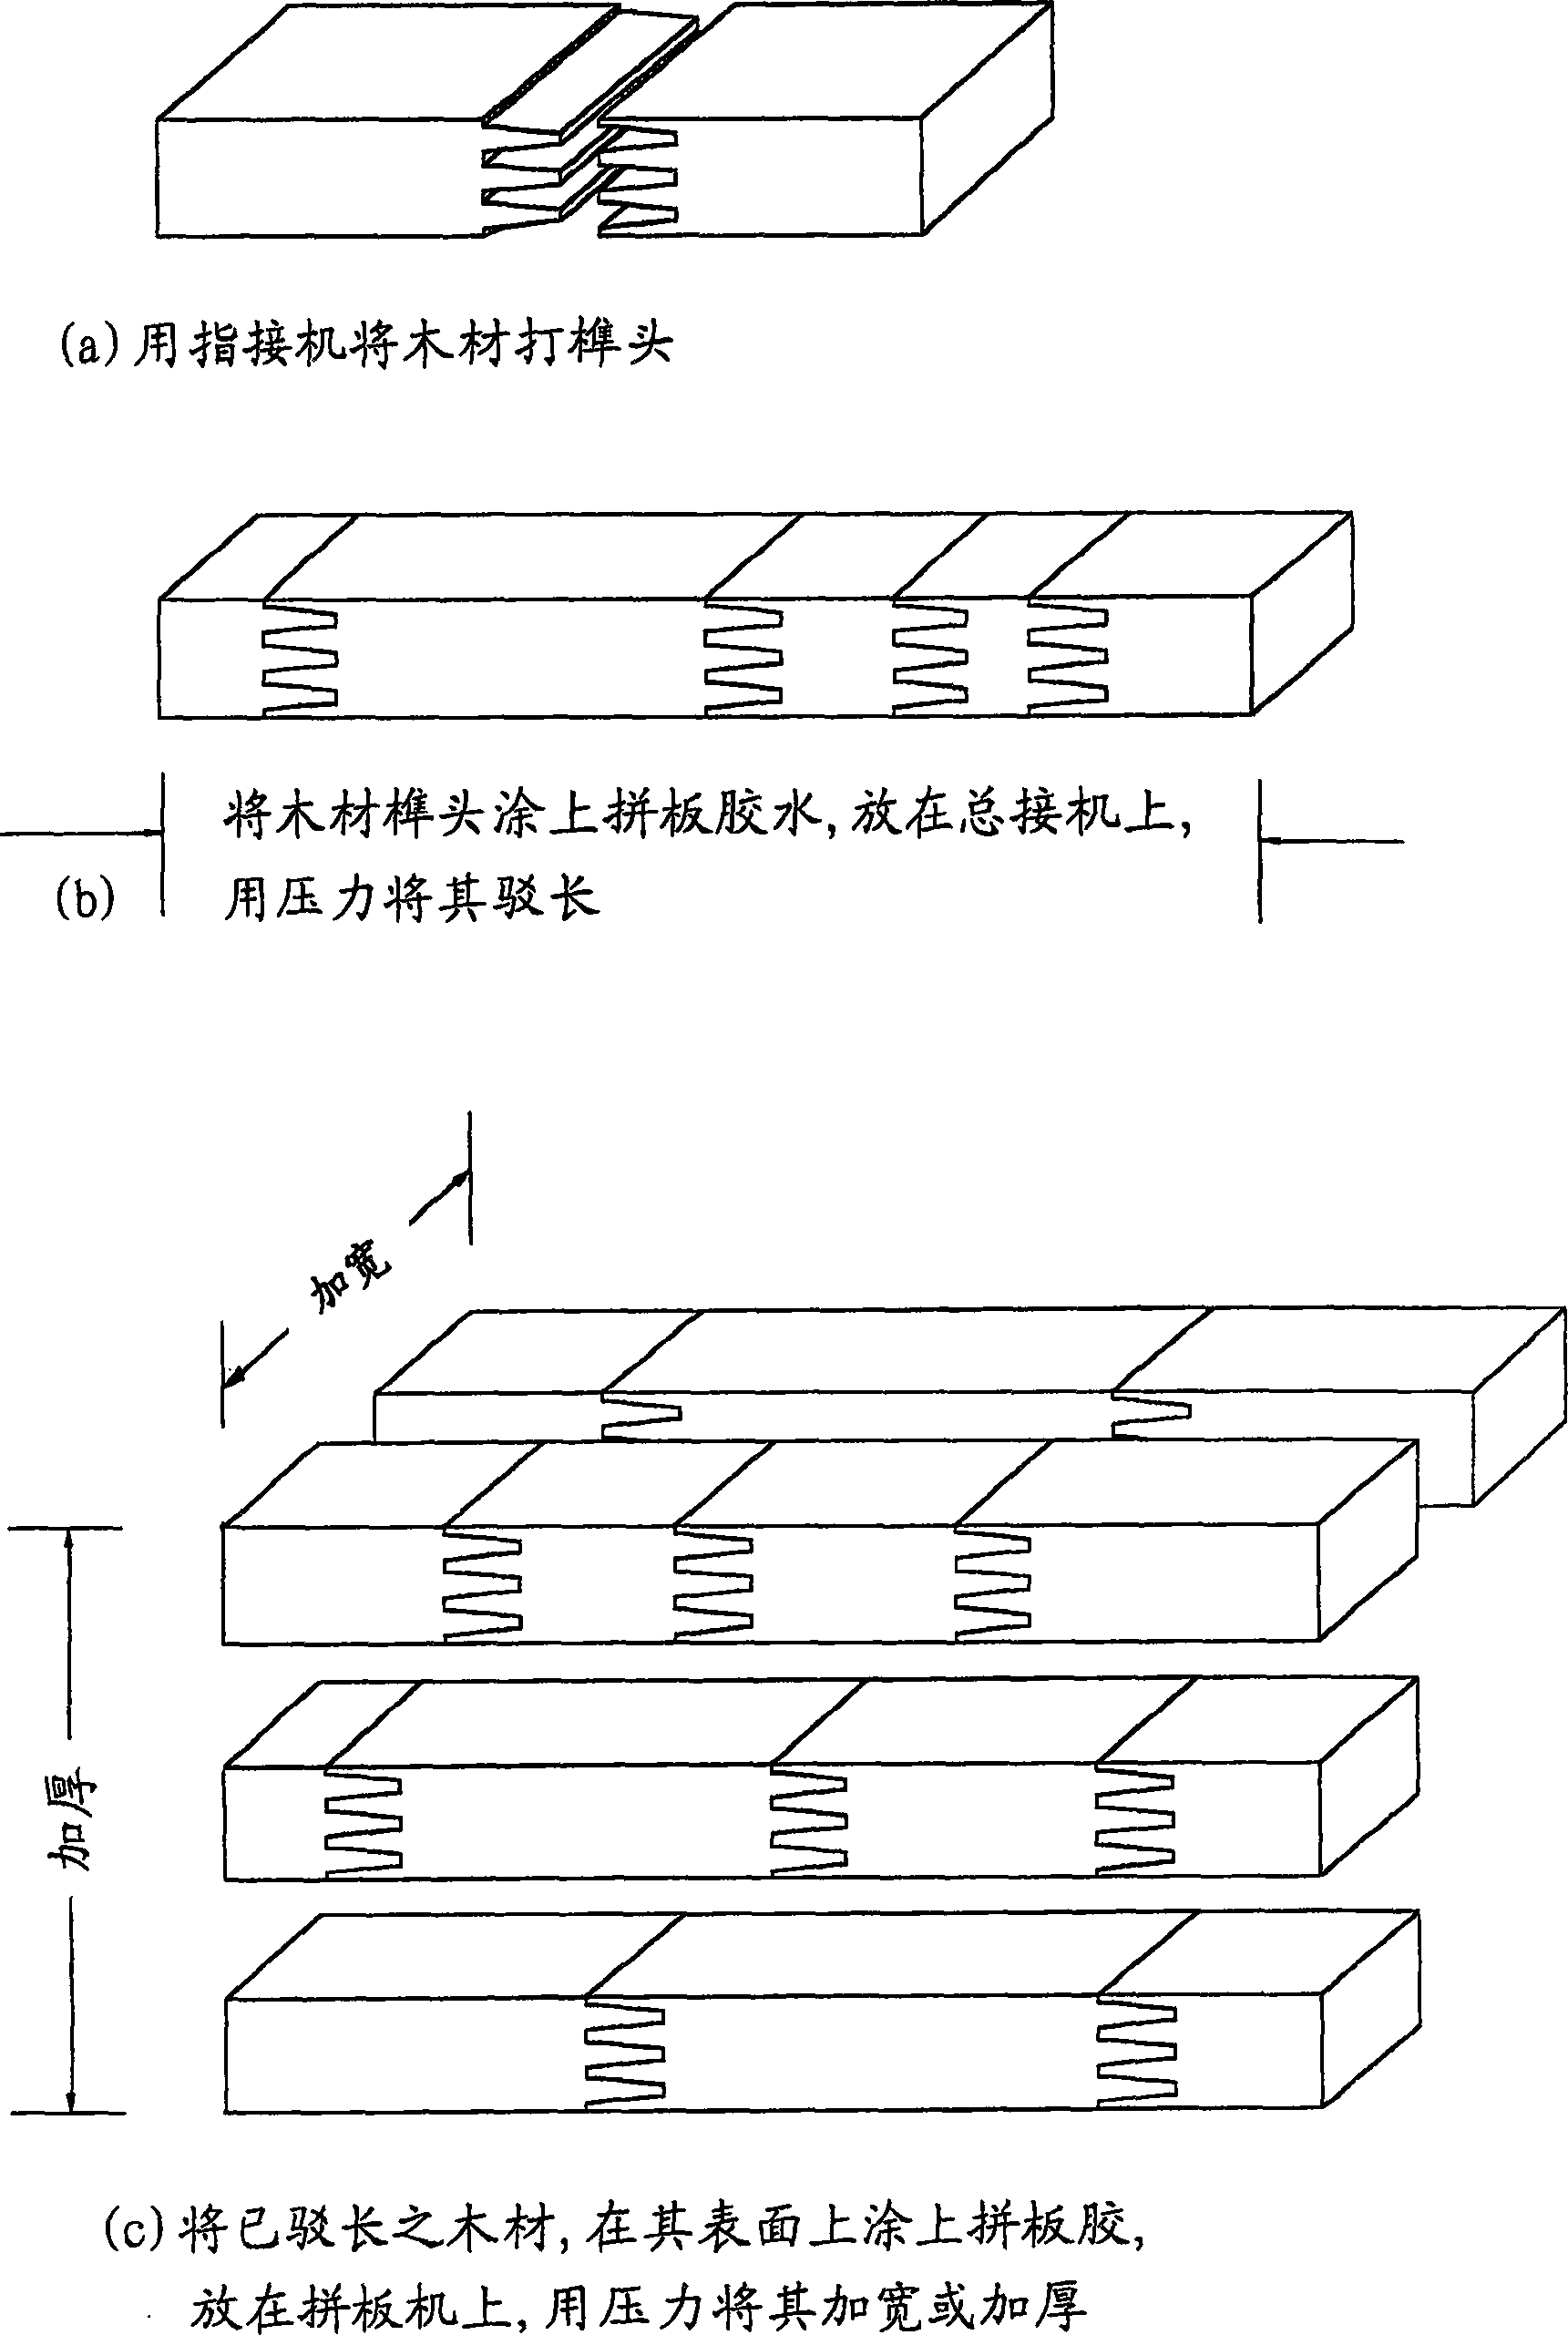 Method for fireproofing and fire retardant timber reconstituted circularly